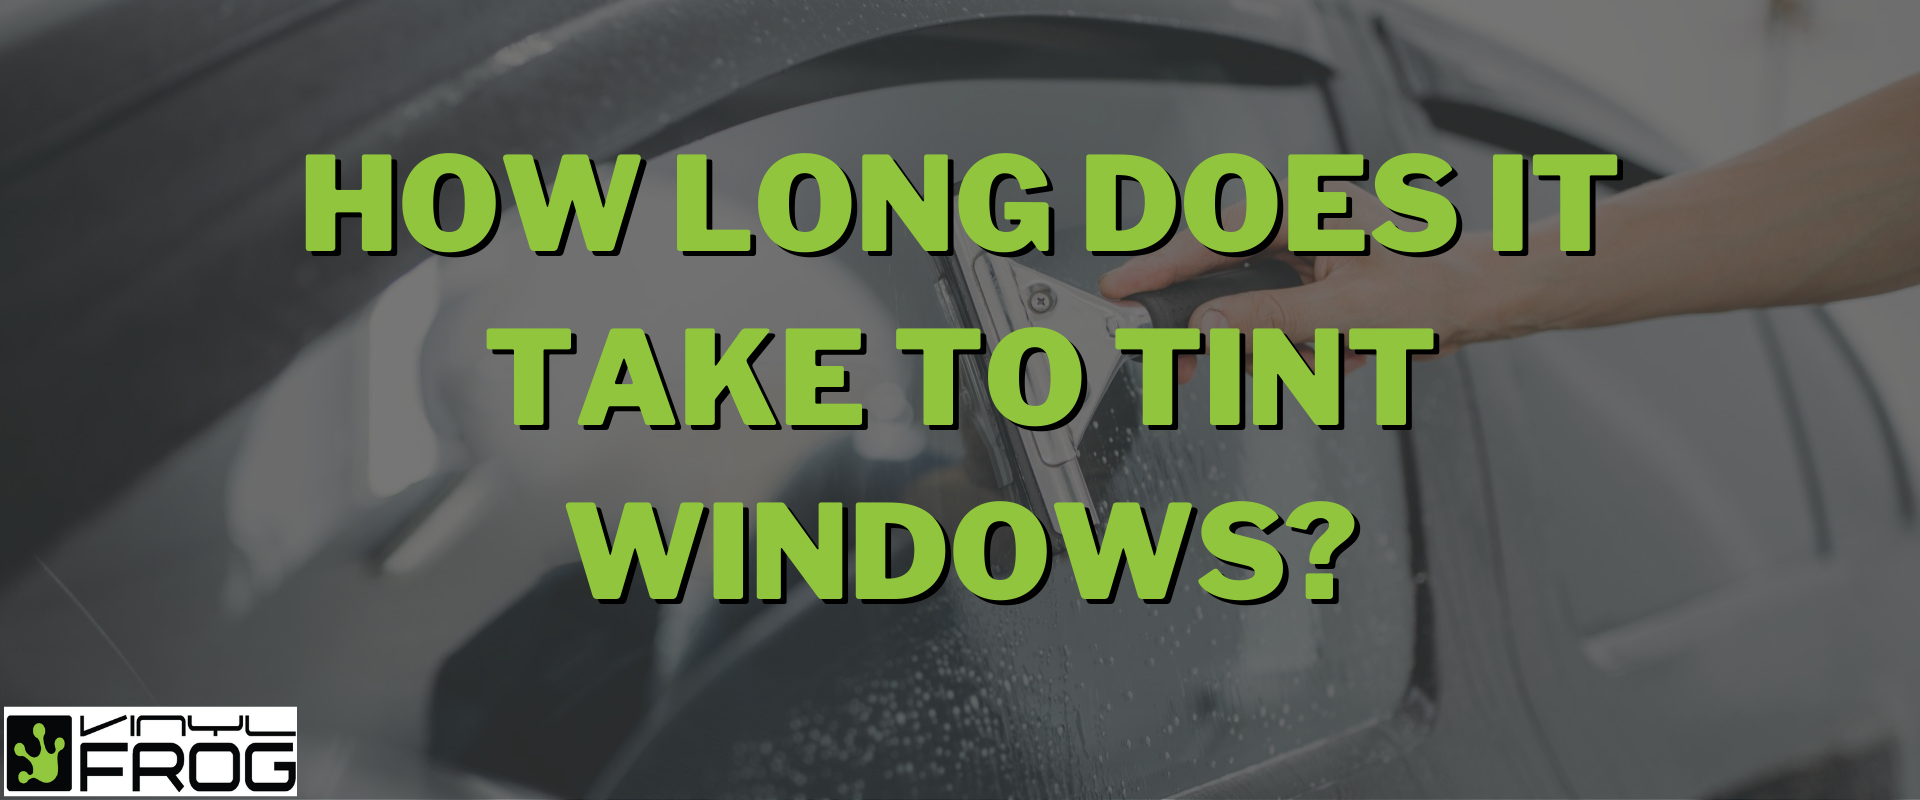 How Long Does It Take To Tint Windows?